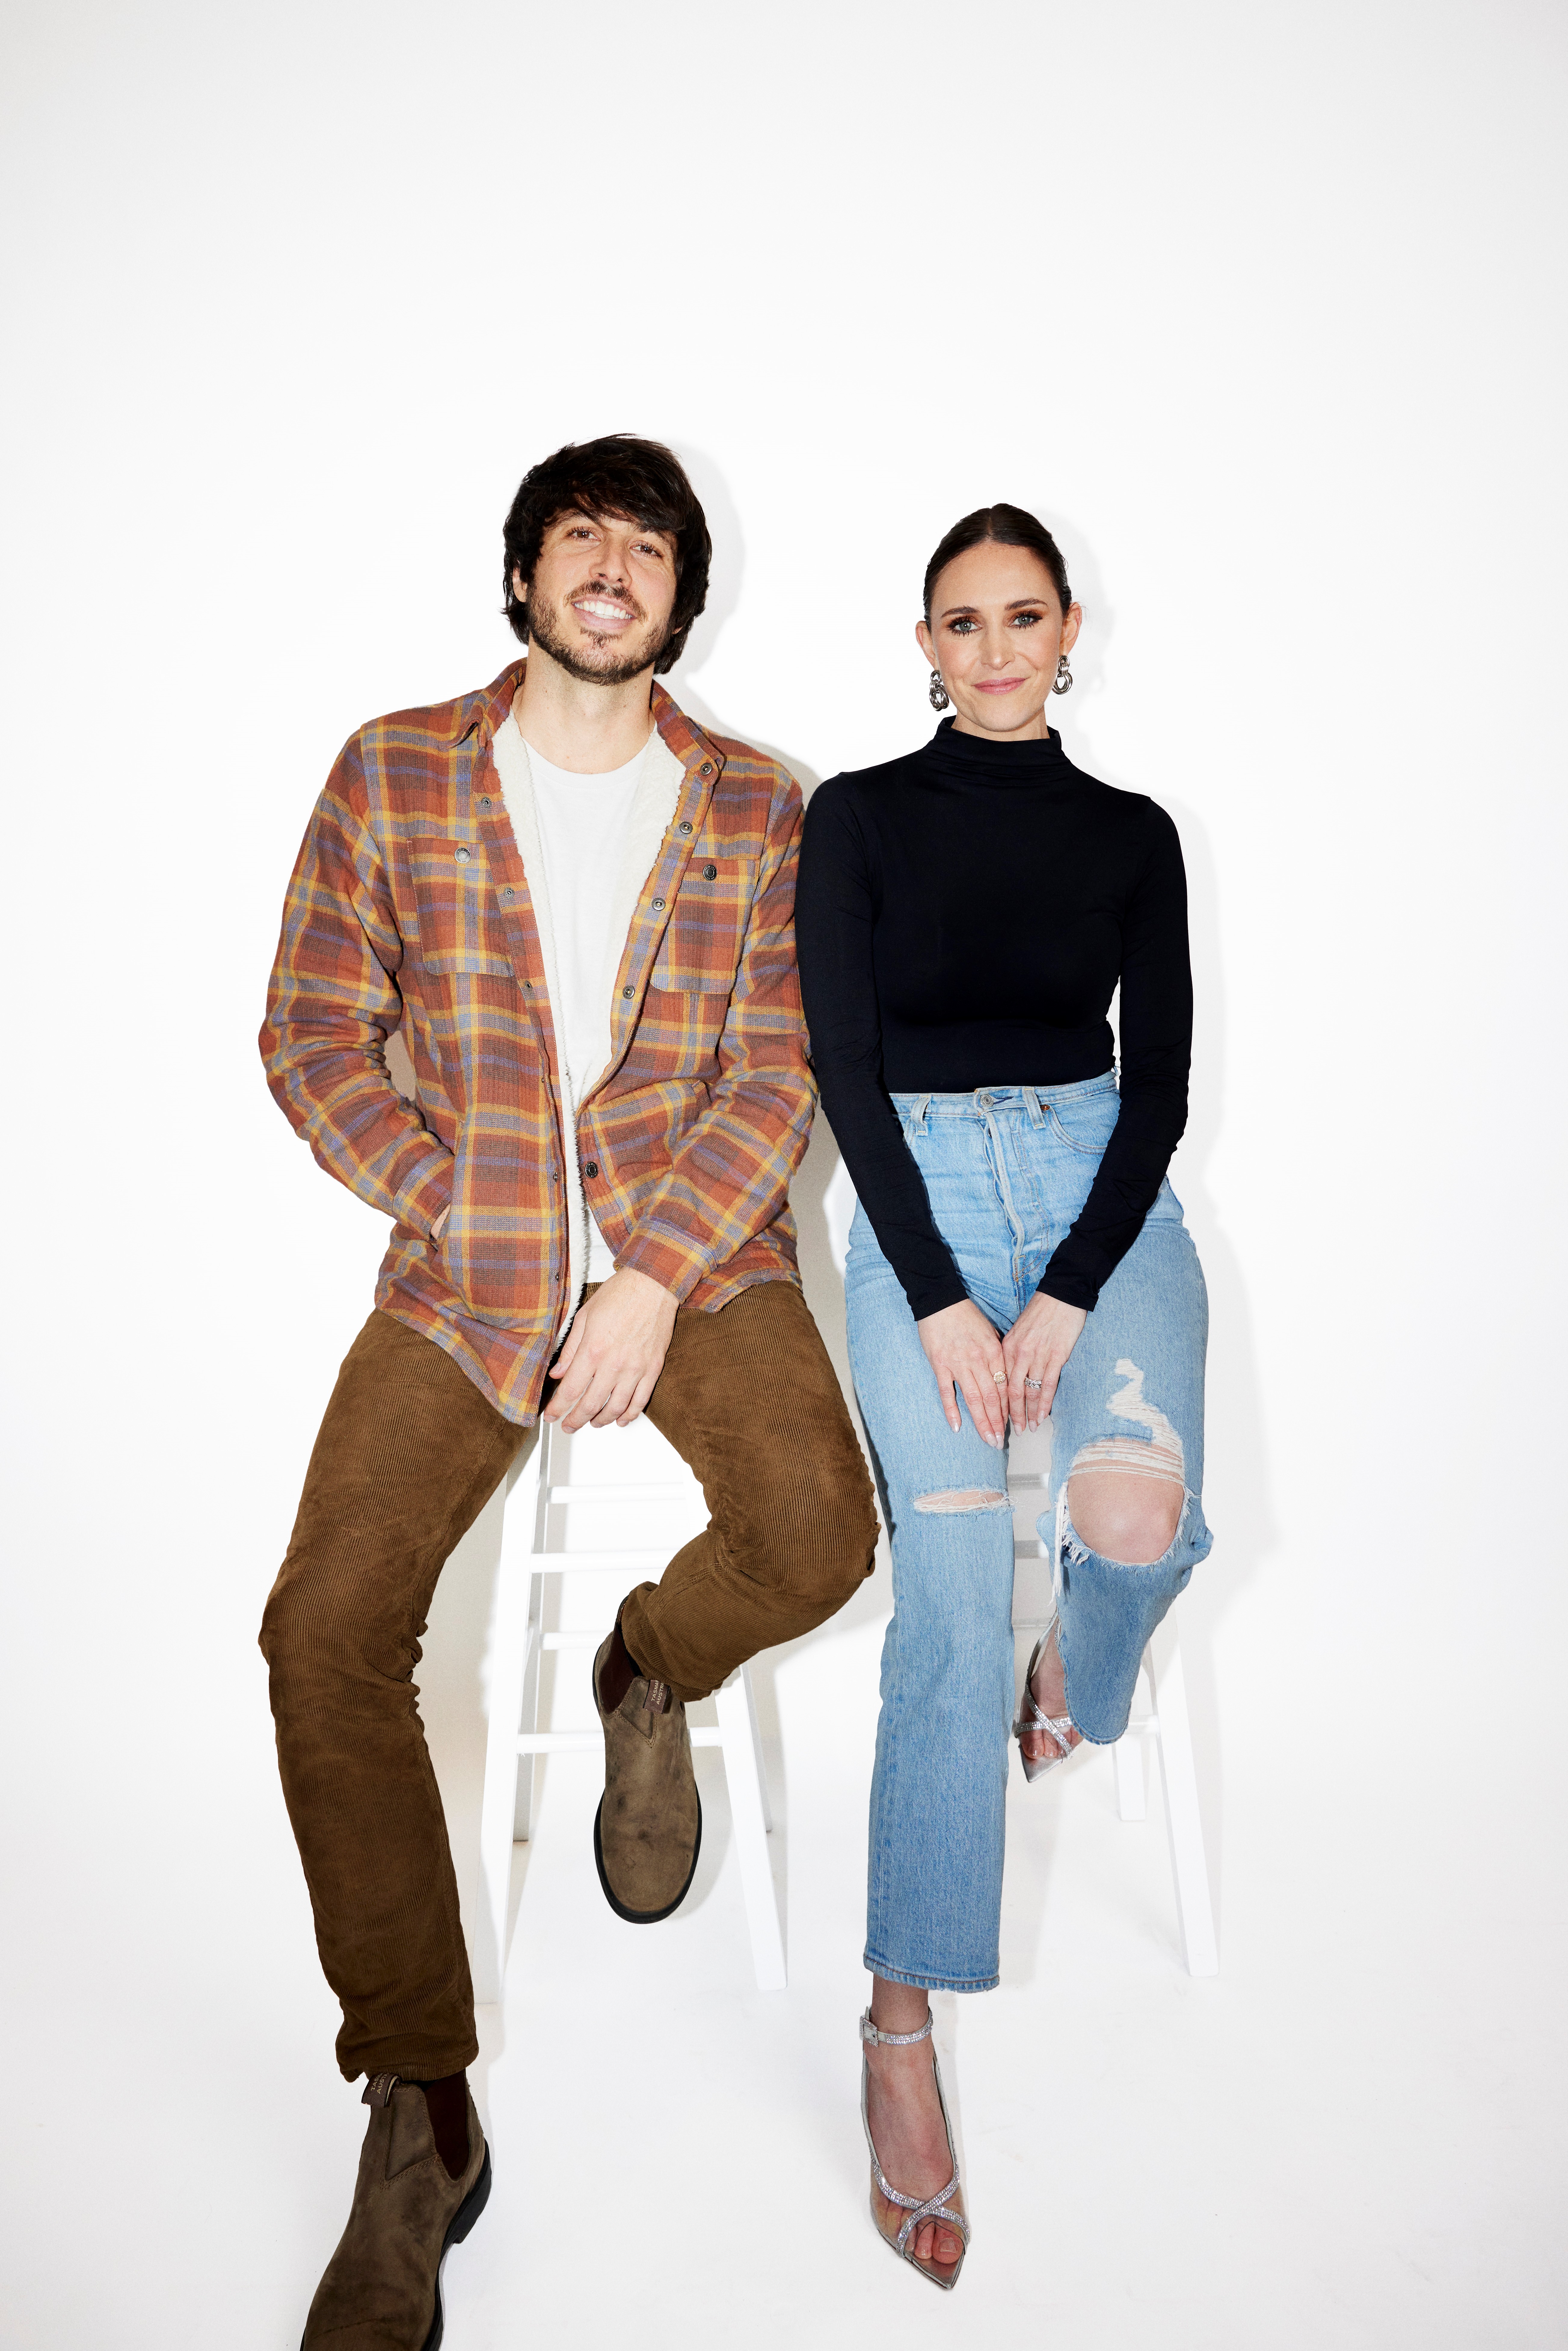 MORGAN EVANS SITS DOWN WITH KELLEIGH BANNEN ON APPLE MUSIC’S TODAY’S COUNTRY RADIO